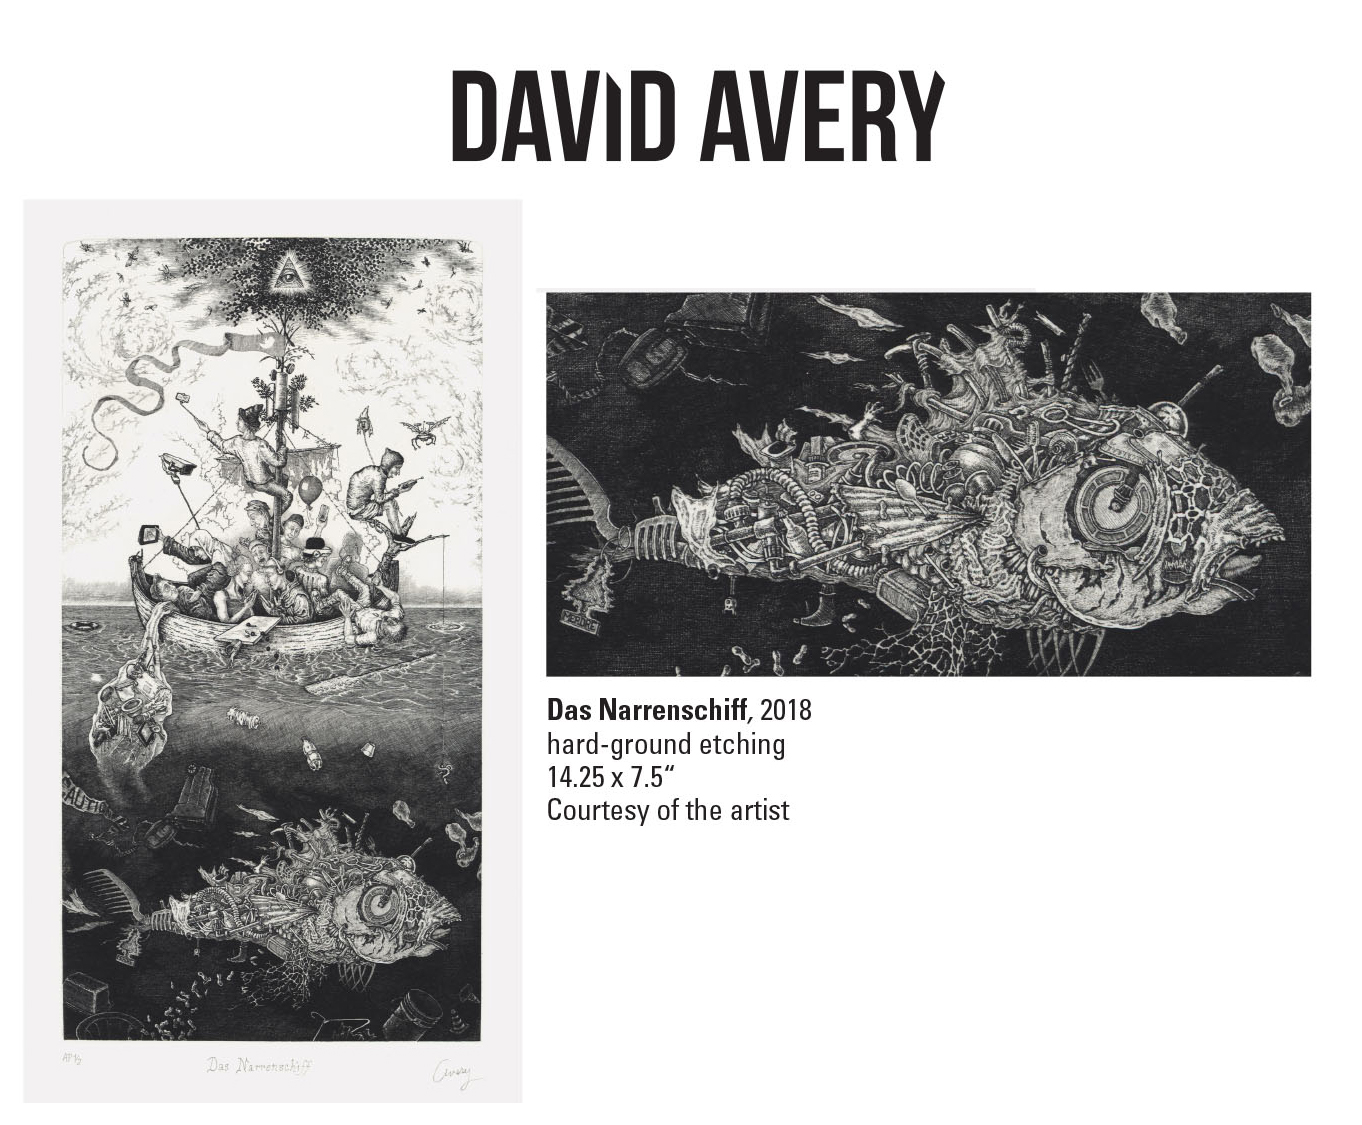 David Avery, Das Narrenschiff, 2018. Hard-ground etching. 14.25 x 7.5" Courtesy of the artist. An etching of a boat in the ocean with a big fish swimming underwater.